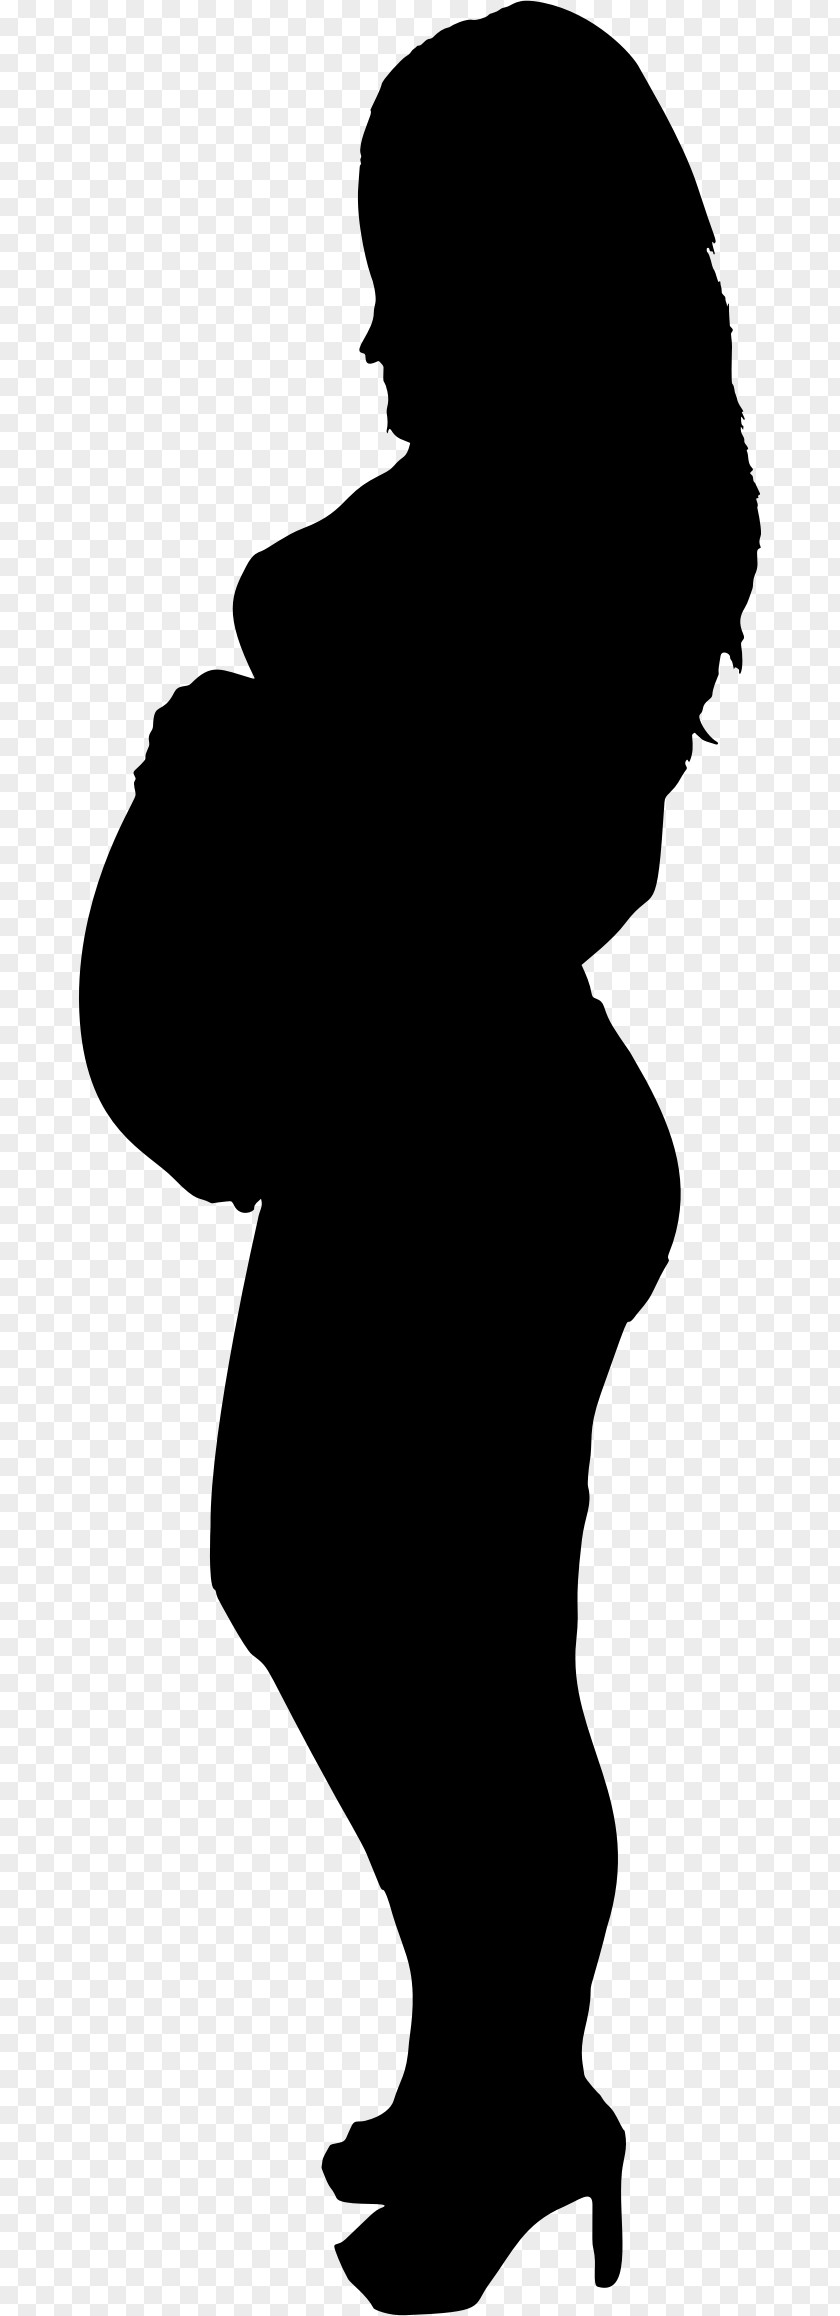 Pregnant Silhouette Pregnancy Abortion Mother Clip Art PNG